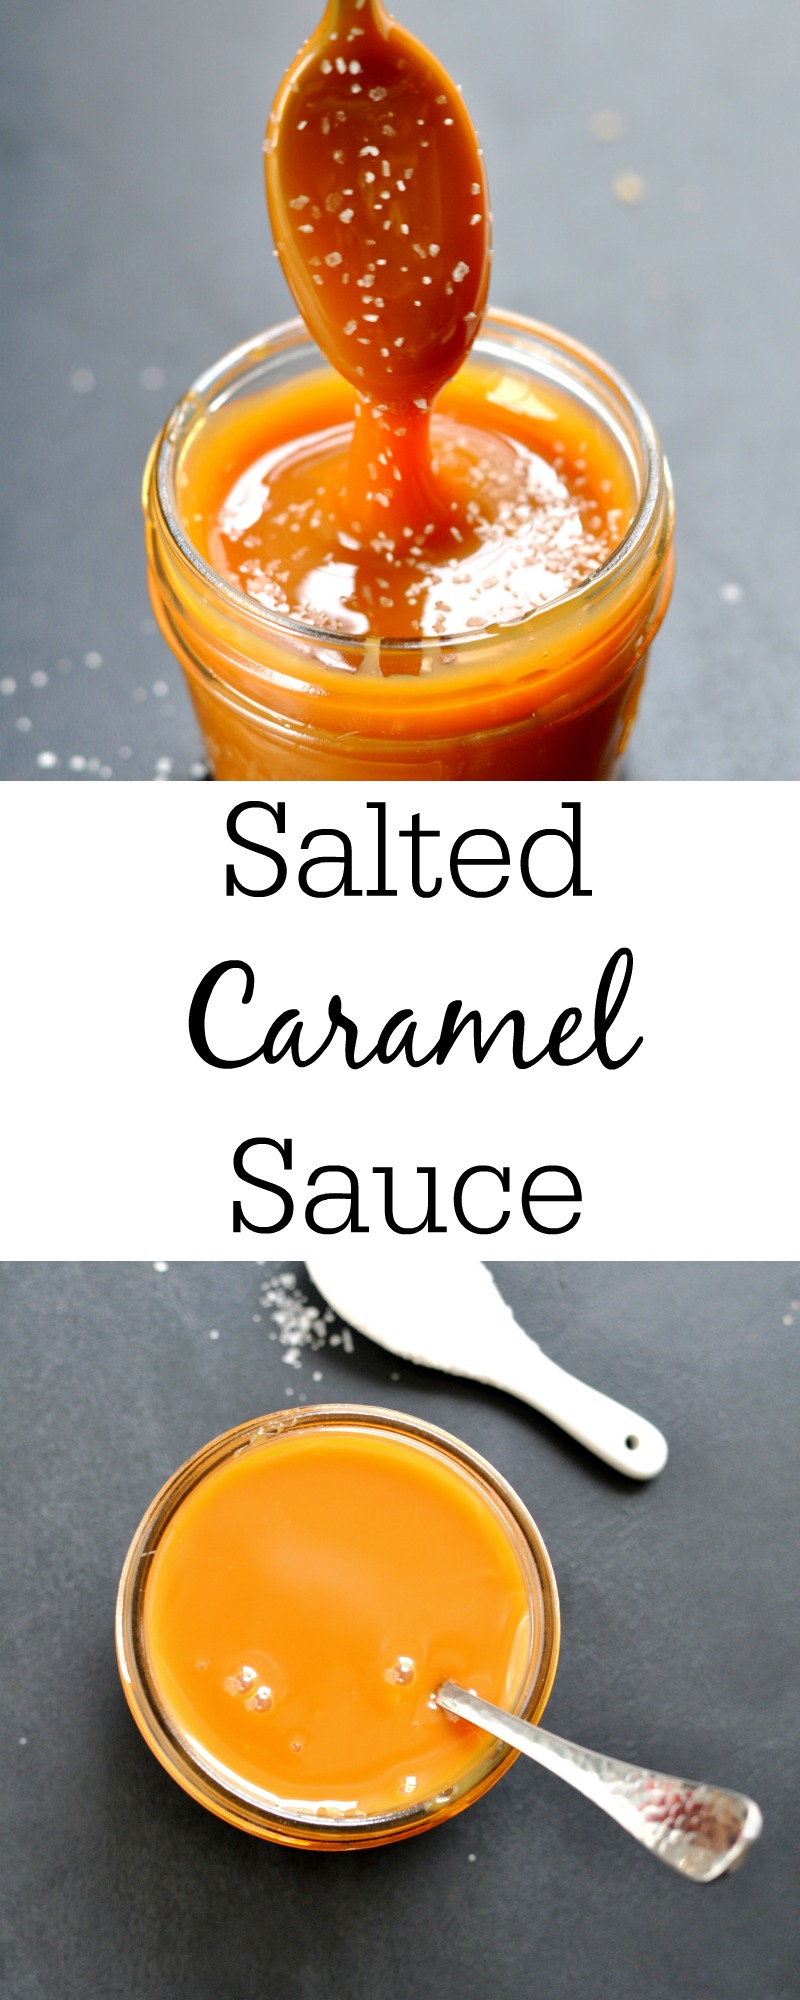 Warm up with the indulgent combination of salt and rich caramel sauce. It makes any dessert or drink instantly better